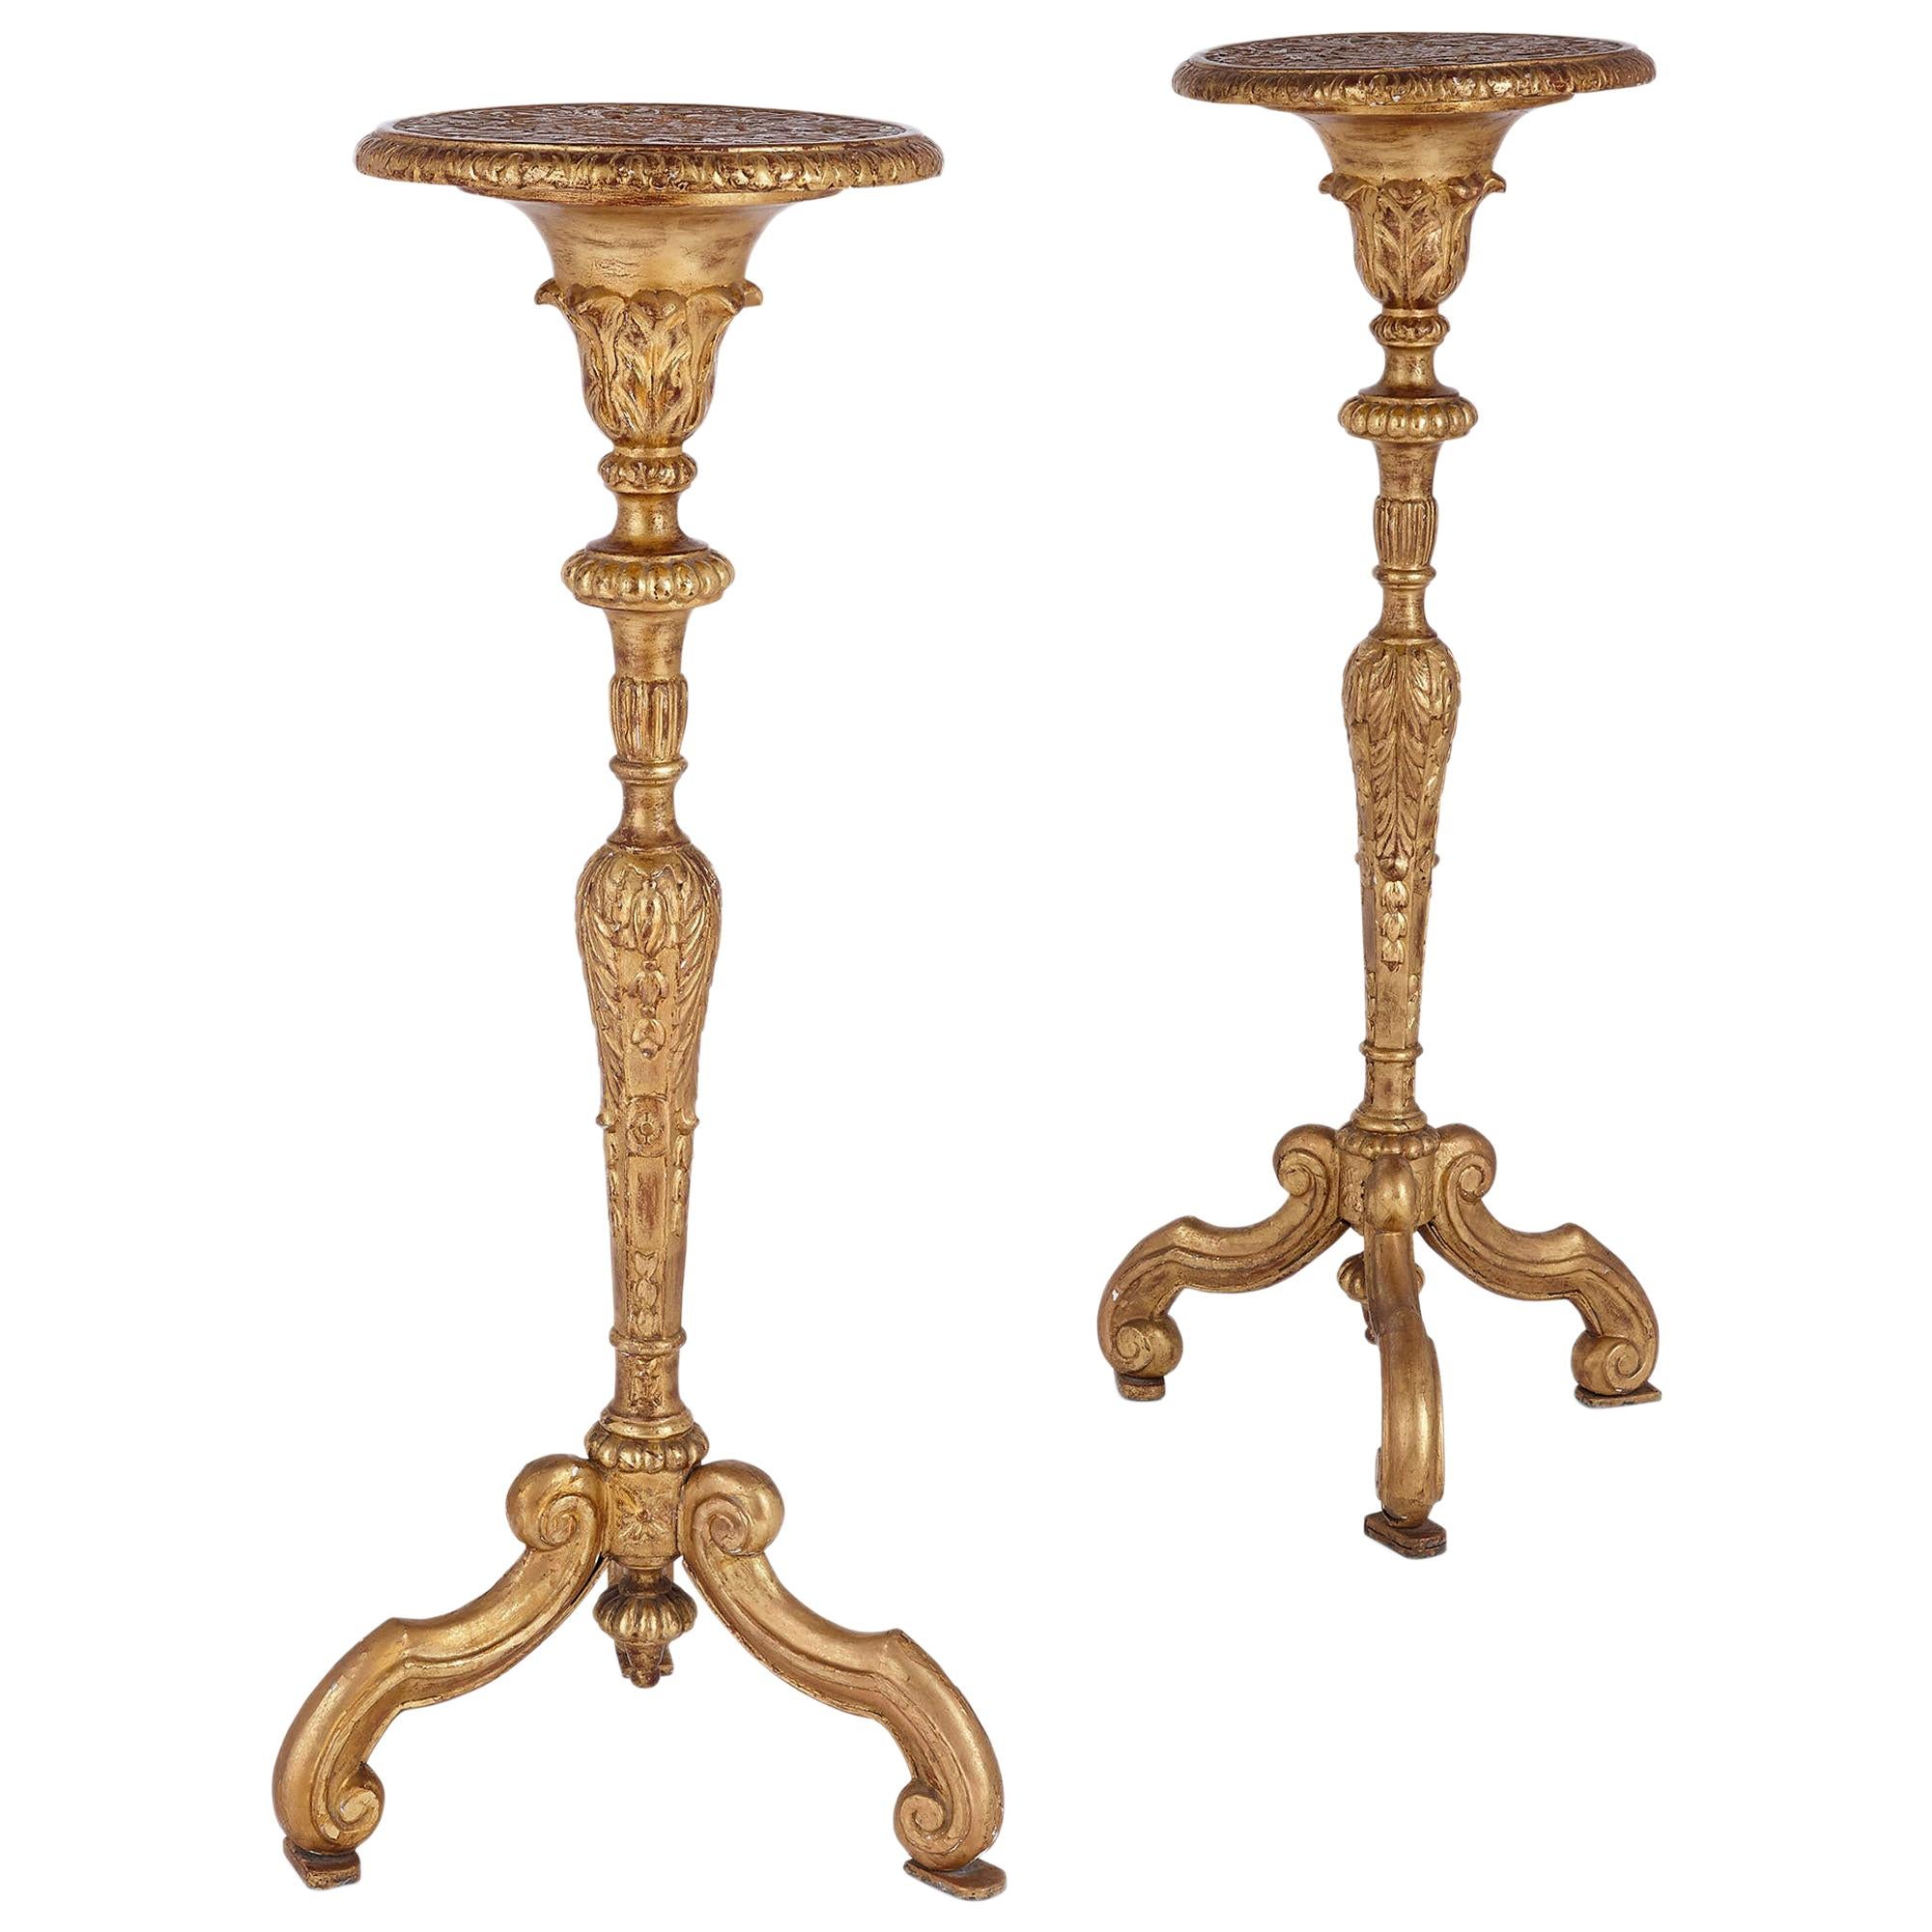 Pair of Antique French Giltwood Torchère Stands